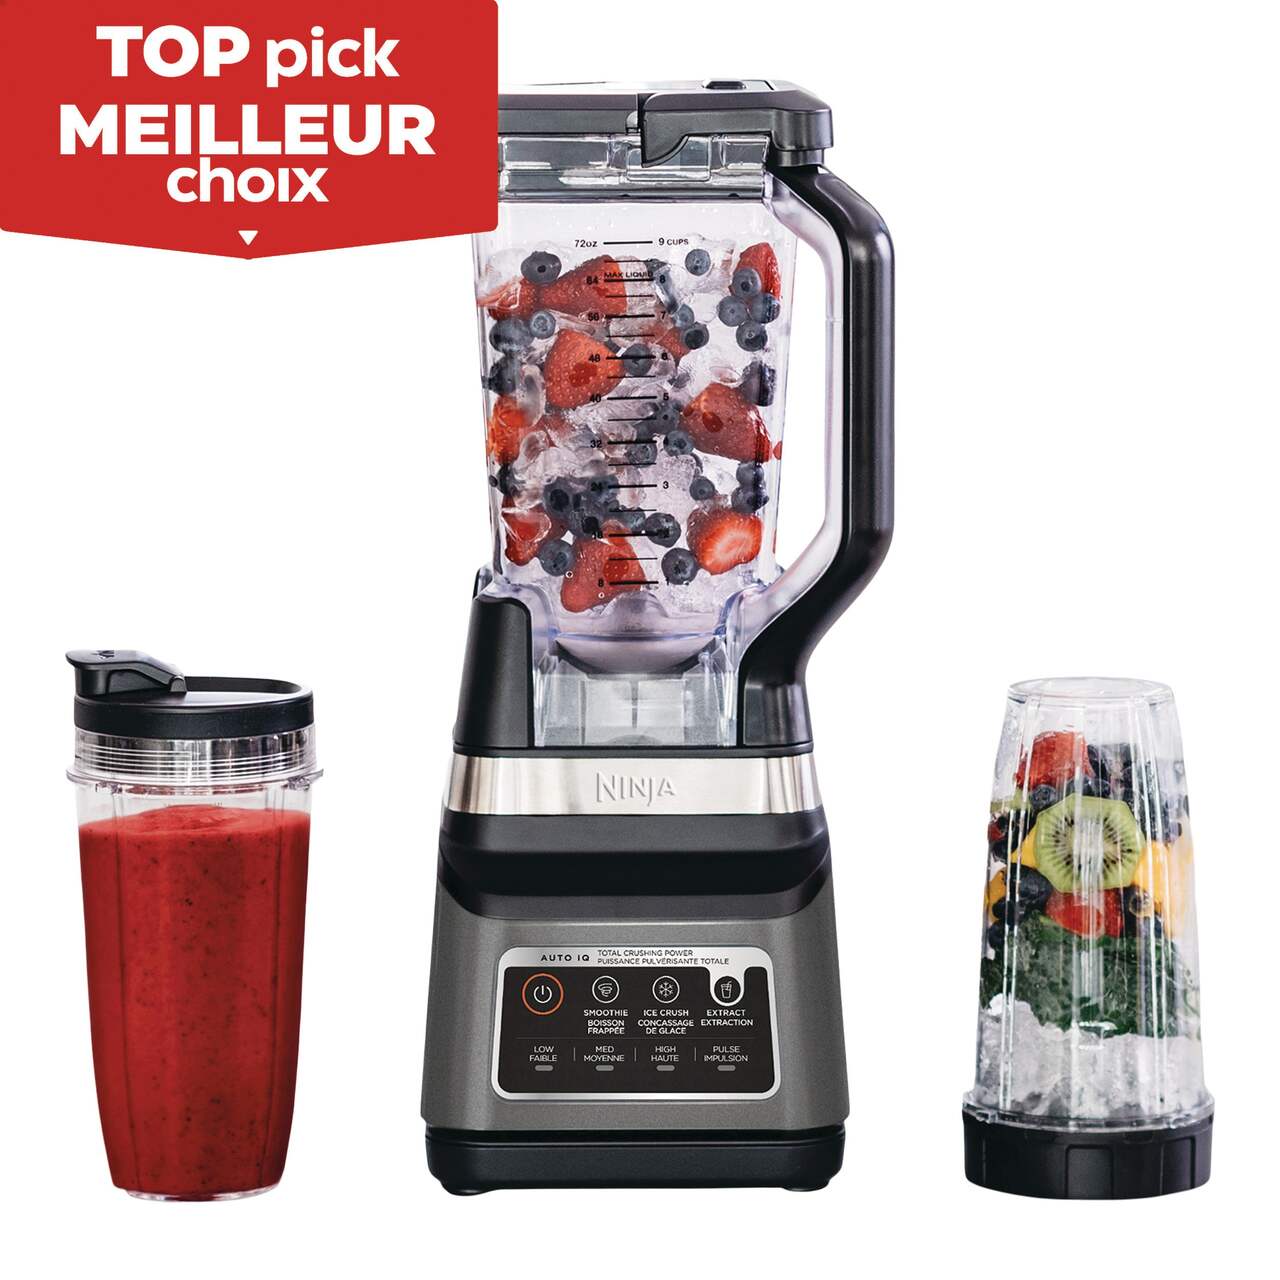 https://media-www.canadiantire.ca/product/living/kitchen/kitchen-appliances/0430730/ninja-professional-plus-blender-duo-with-auto-iq-63235528-ad99-494a-9d3e-f816601579be-jpgrendition.jpg?imdensity=1&imwidth=640&impolicy=mZoom